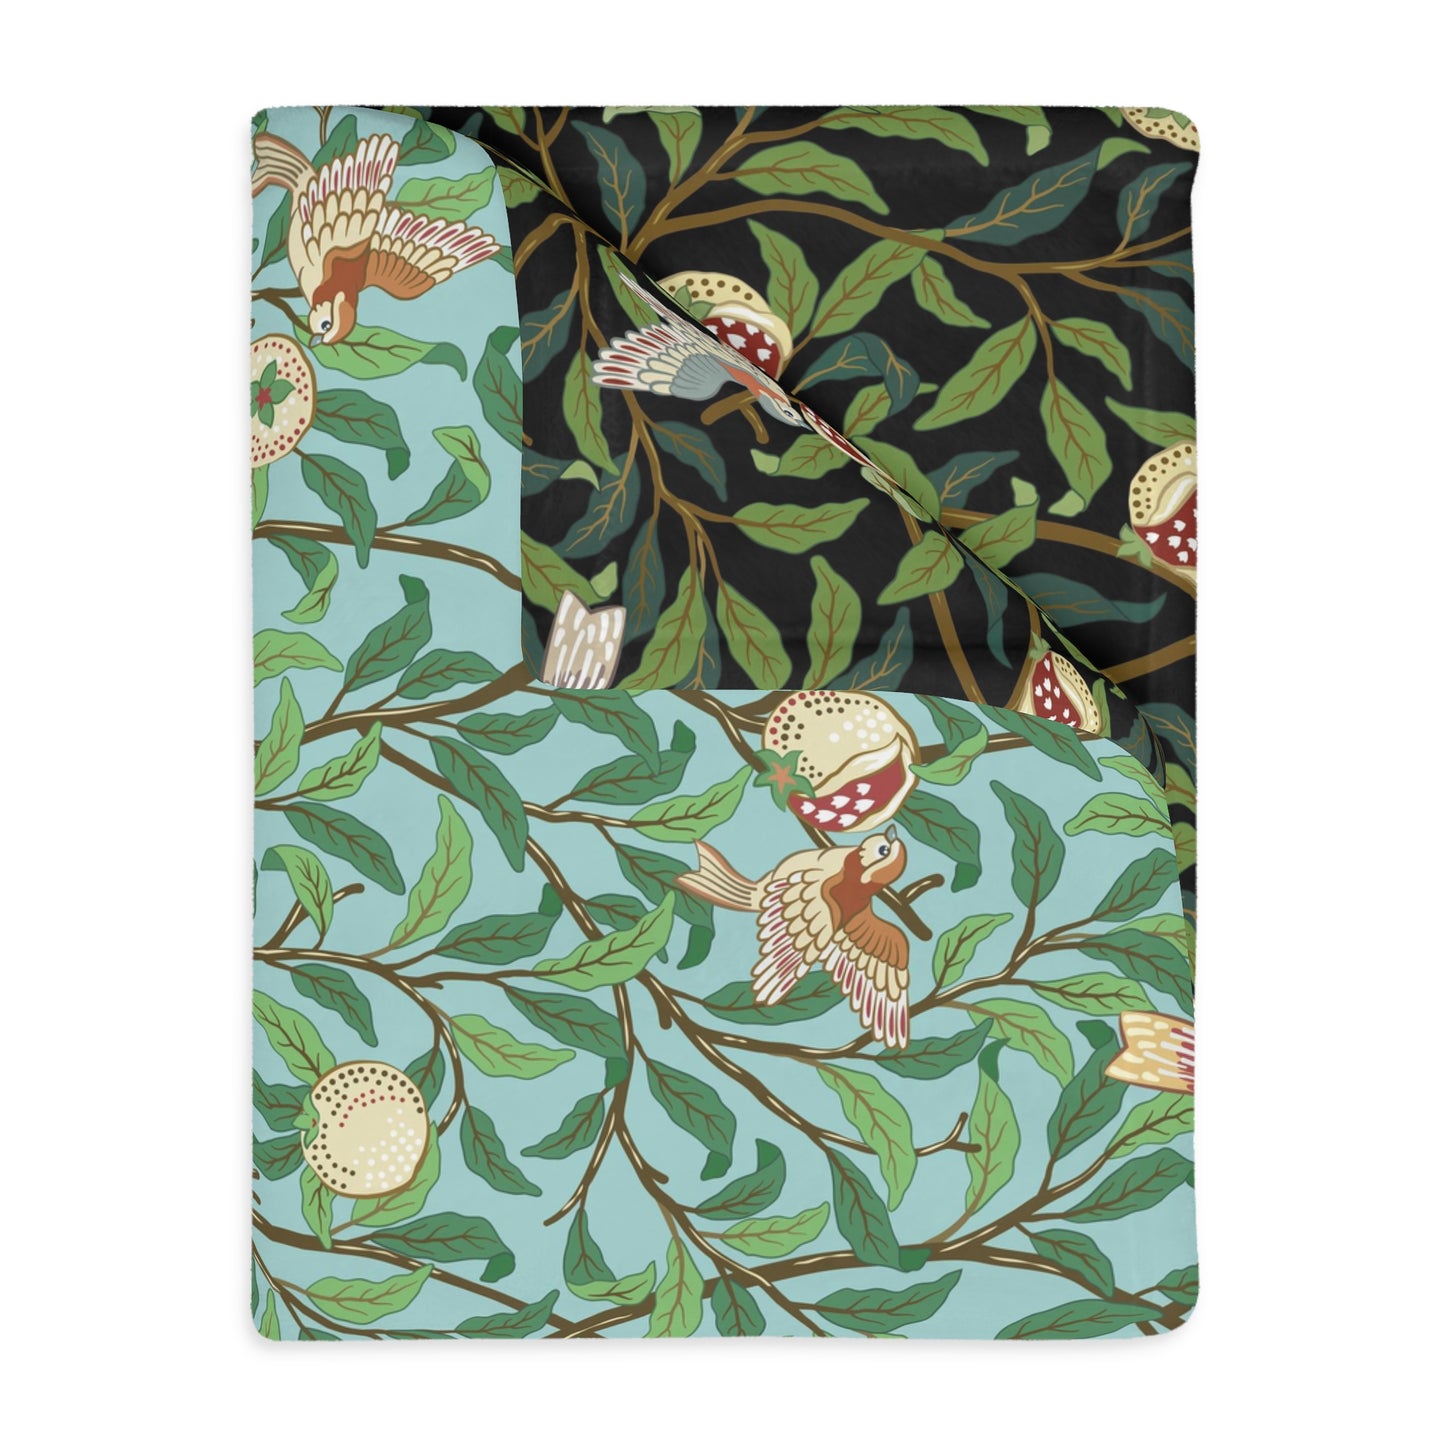 william-morris-co-luxury-velveteen-minky-blanket-two-sided-print-bird-and-pomegranate-collection-tiffany-blue-onyx-5